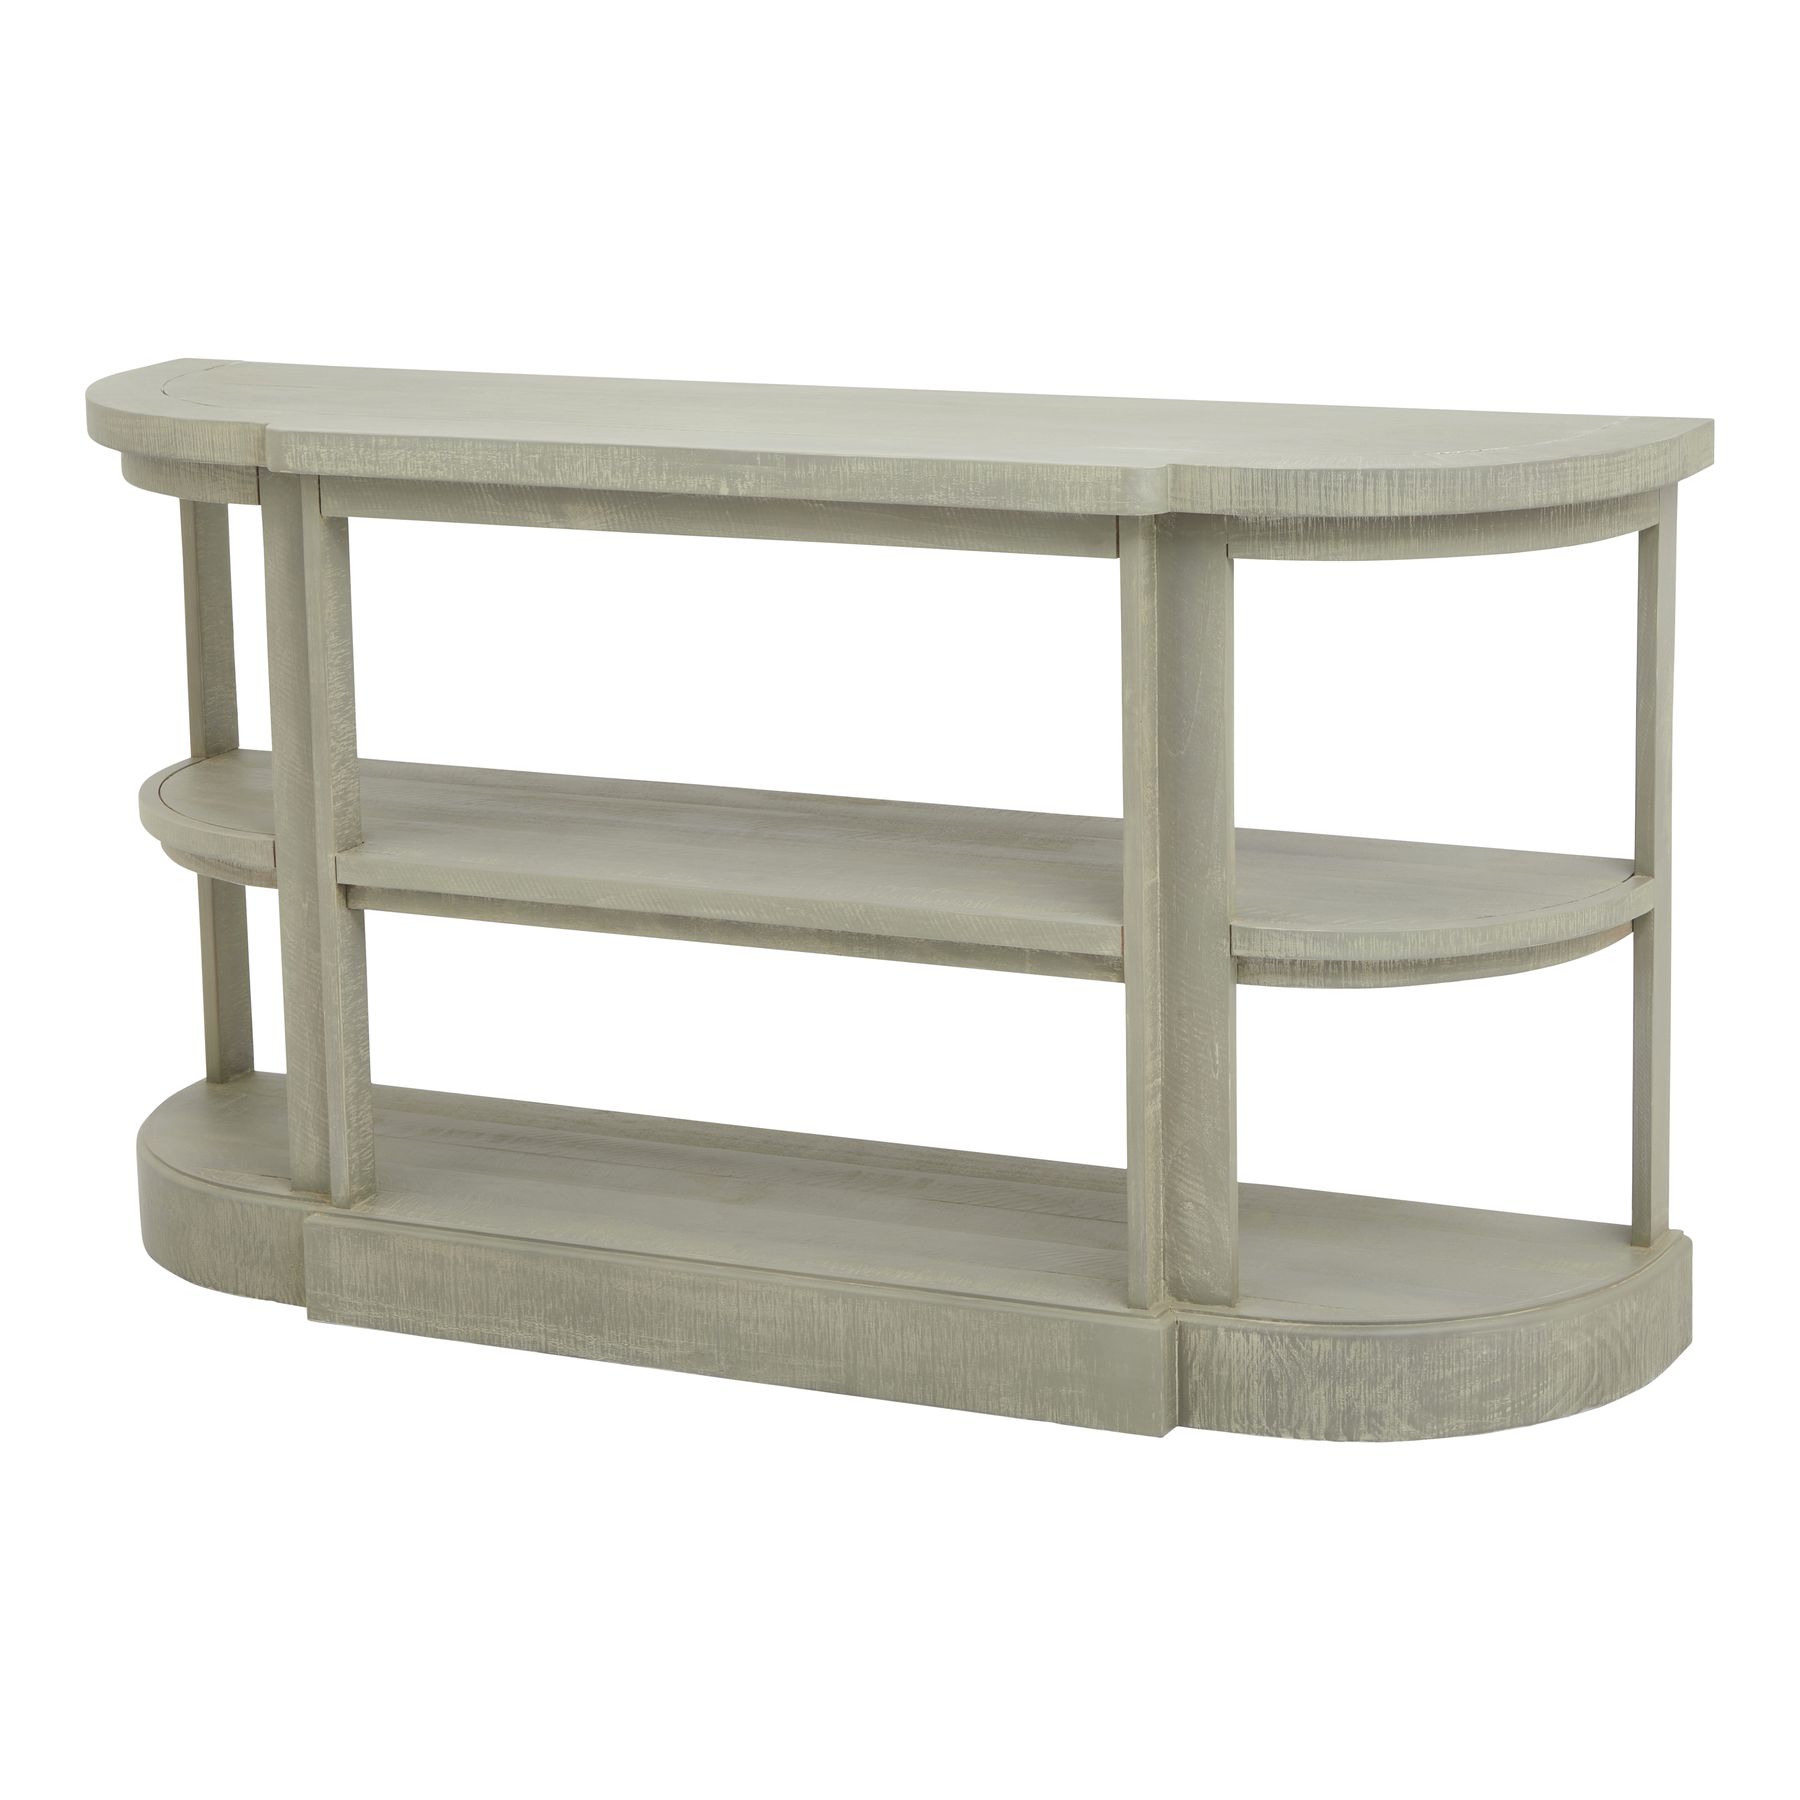 Saltaire Collection 2 Shelf Console Table - Image 1